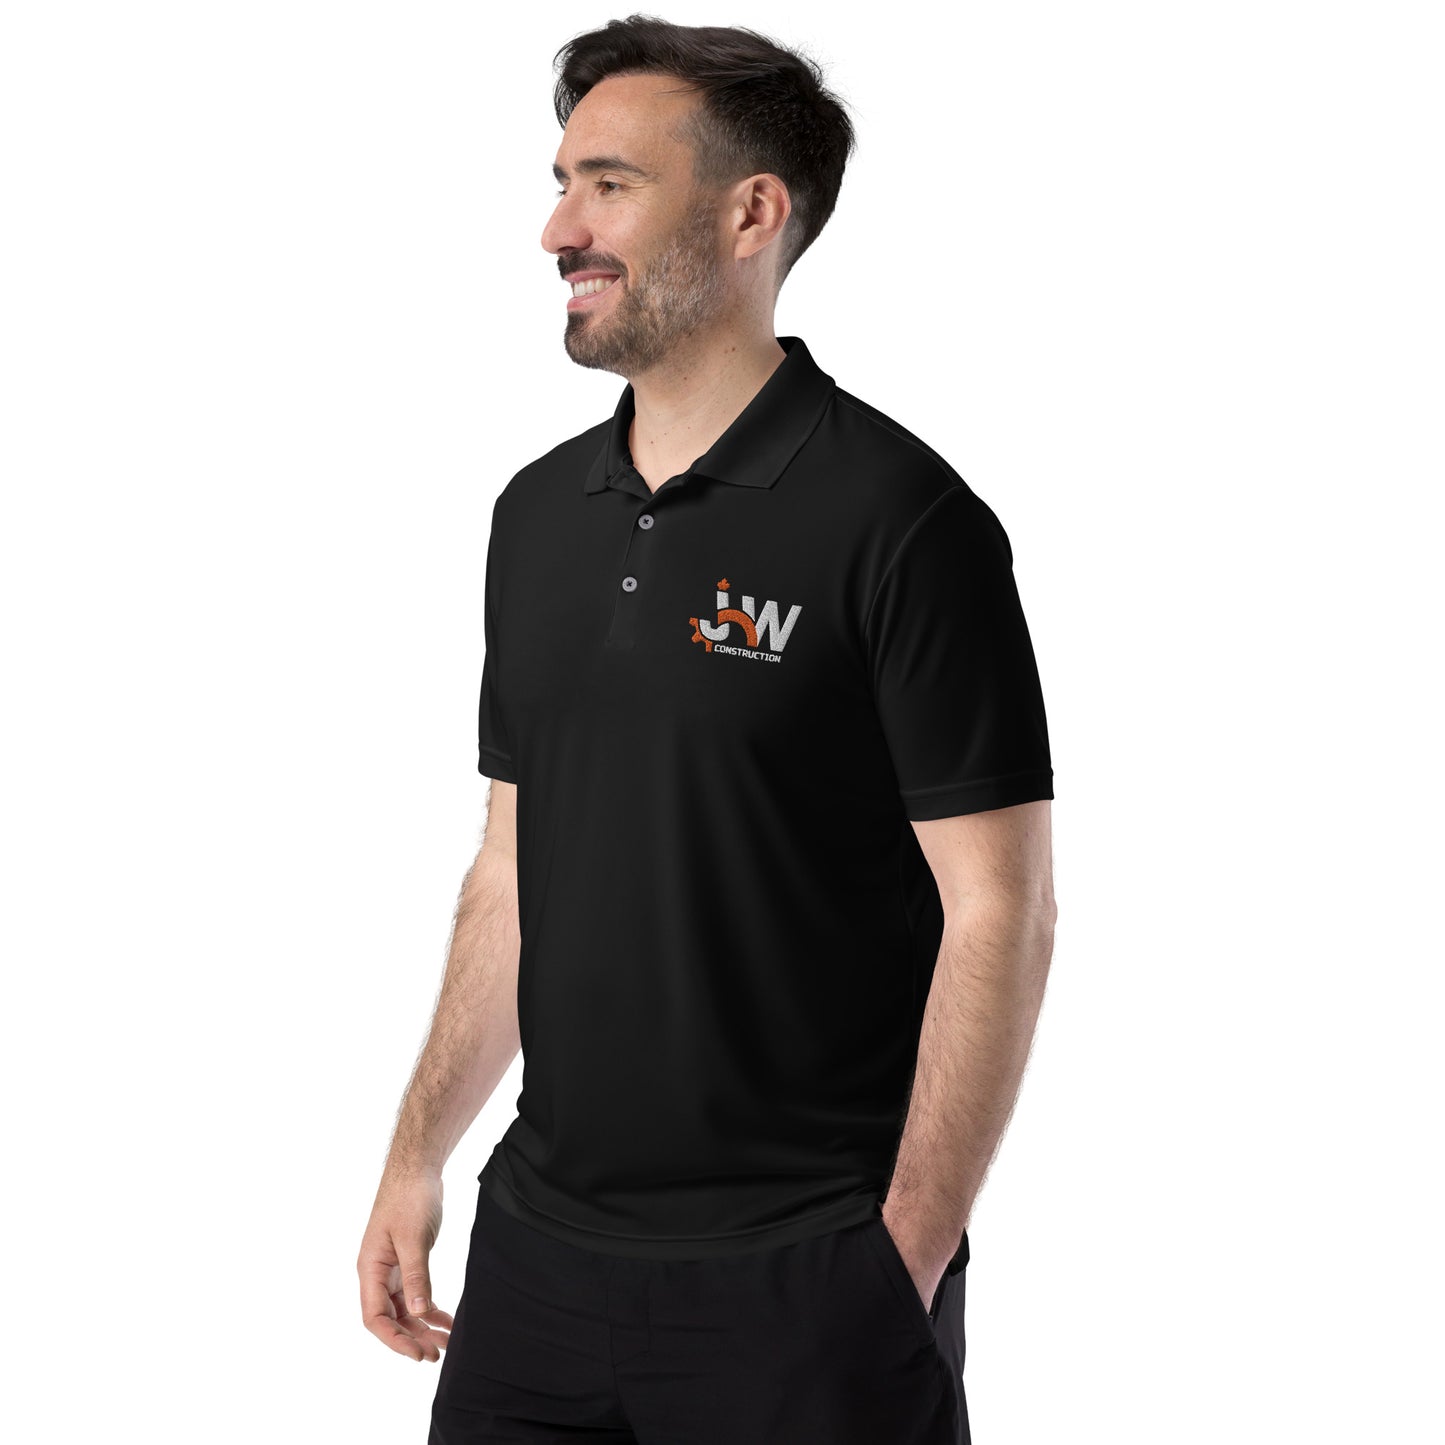 JHW polo shirt with Embroidery